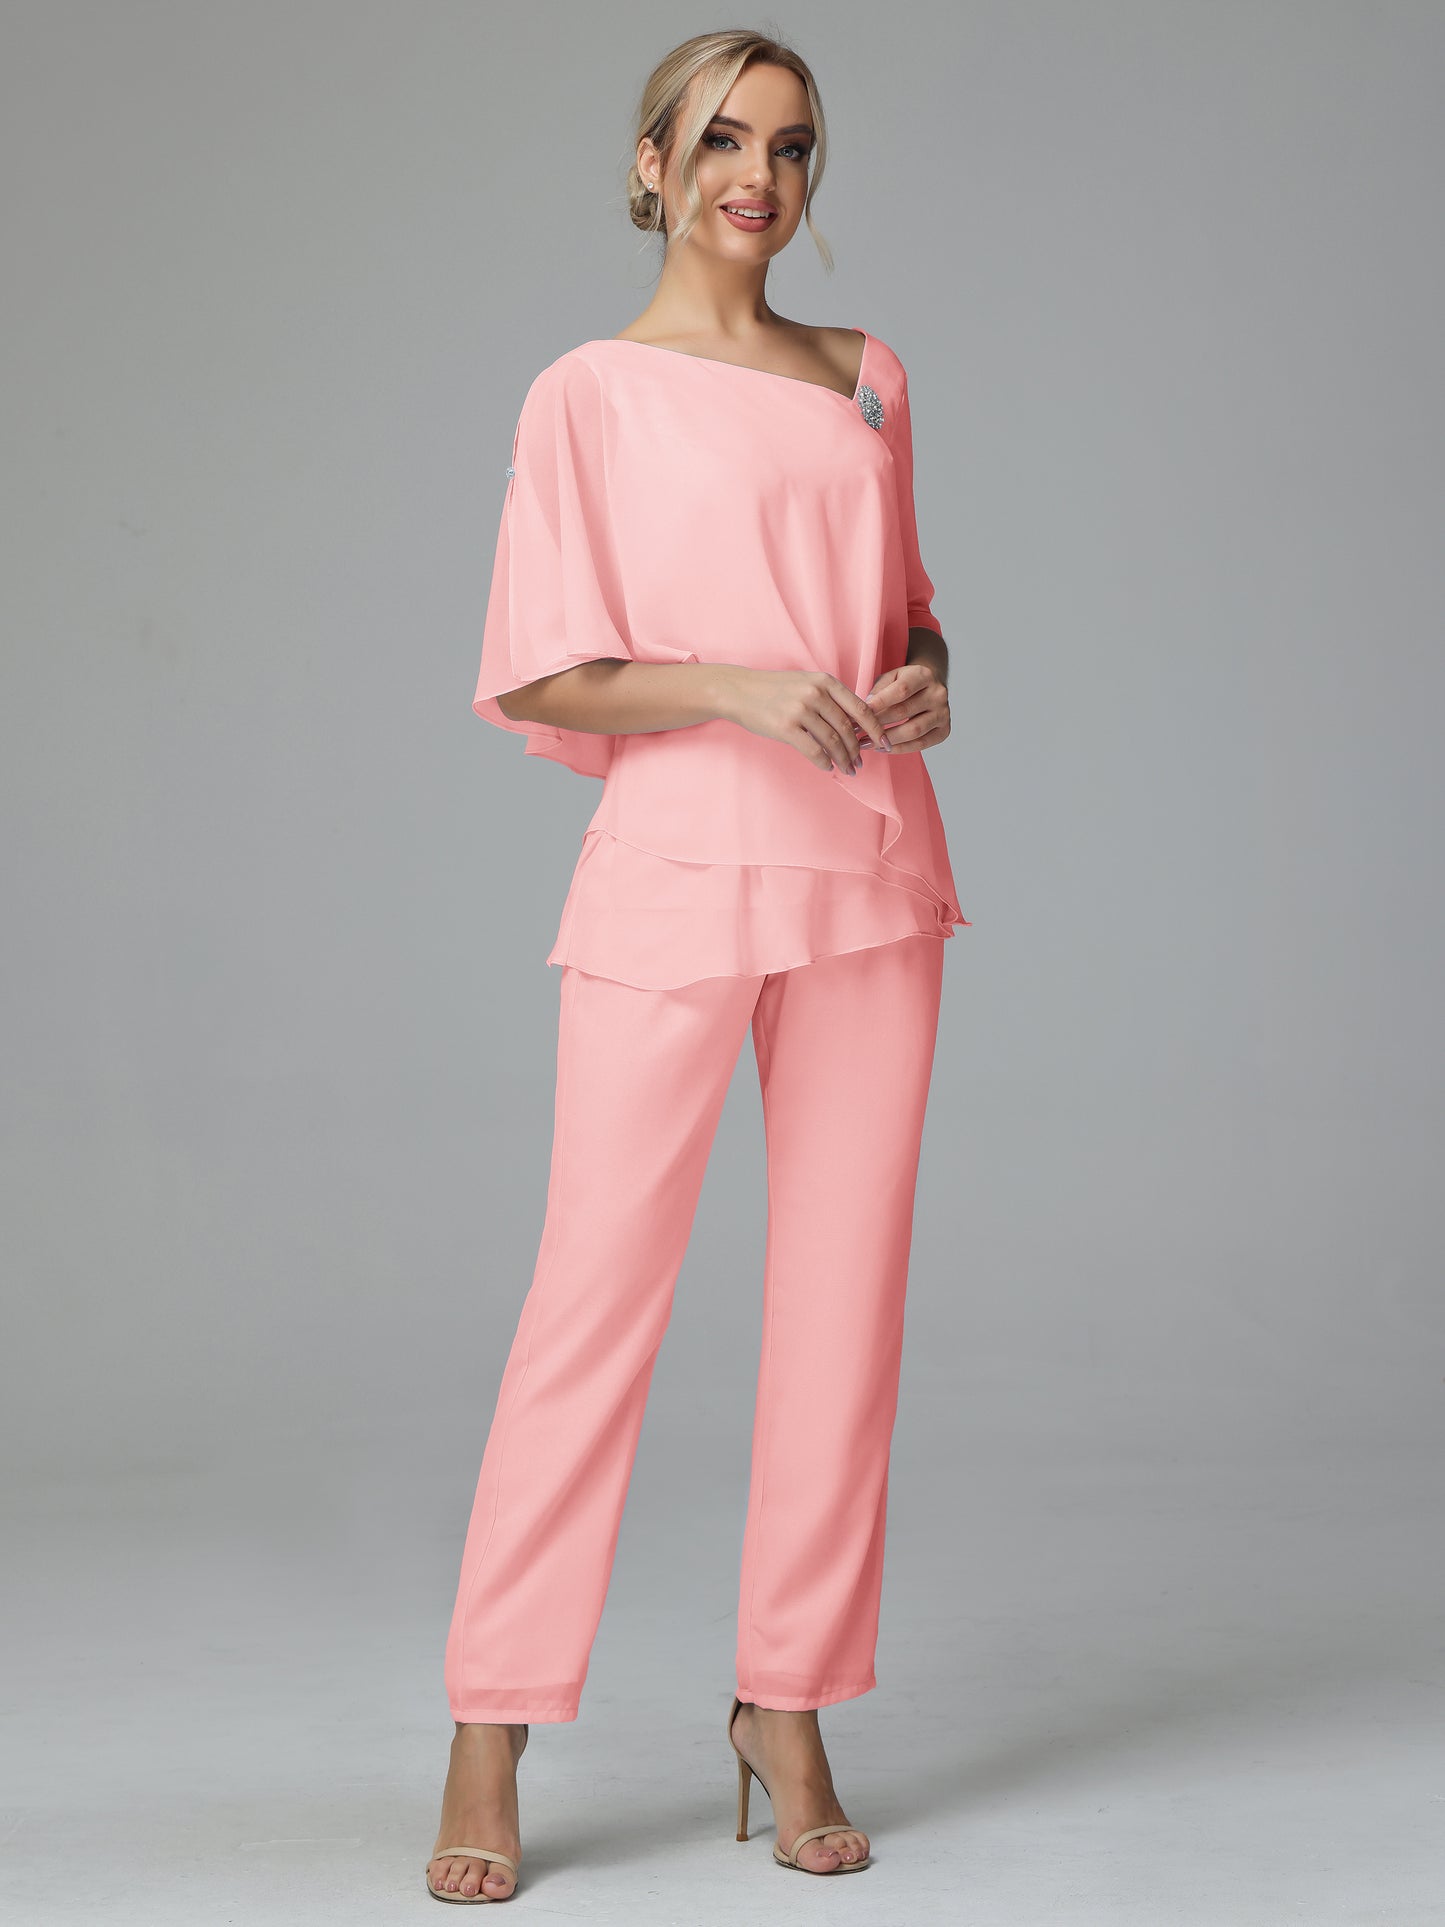 Half Sleeves Chiffon Mother Of The Bride Dress Pant Suits